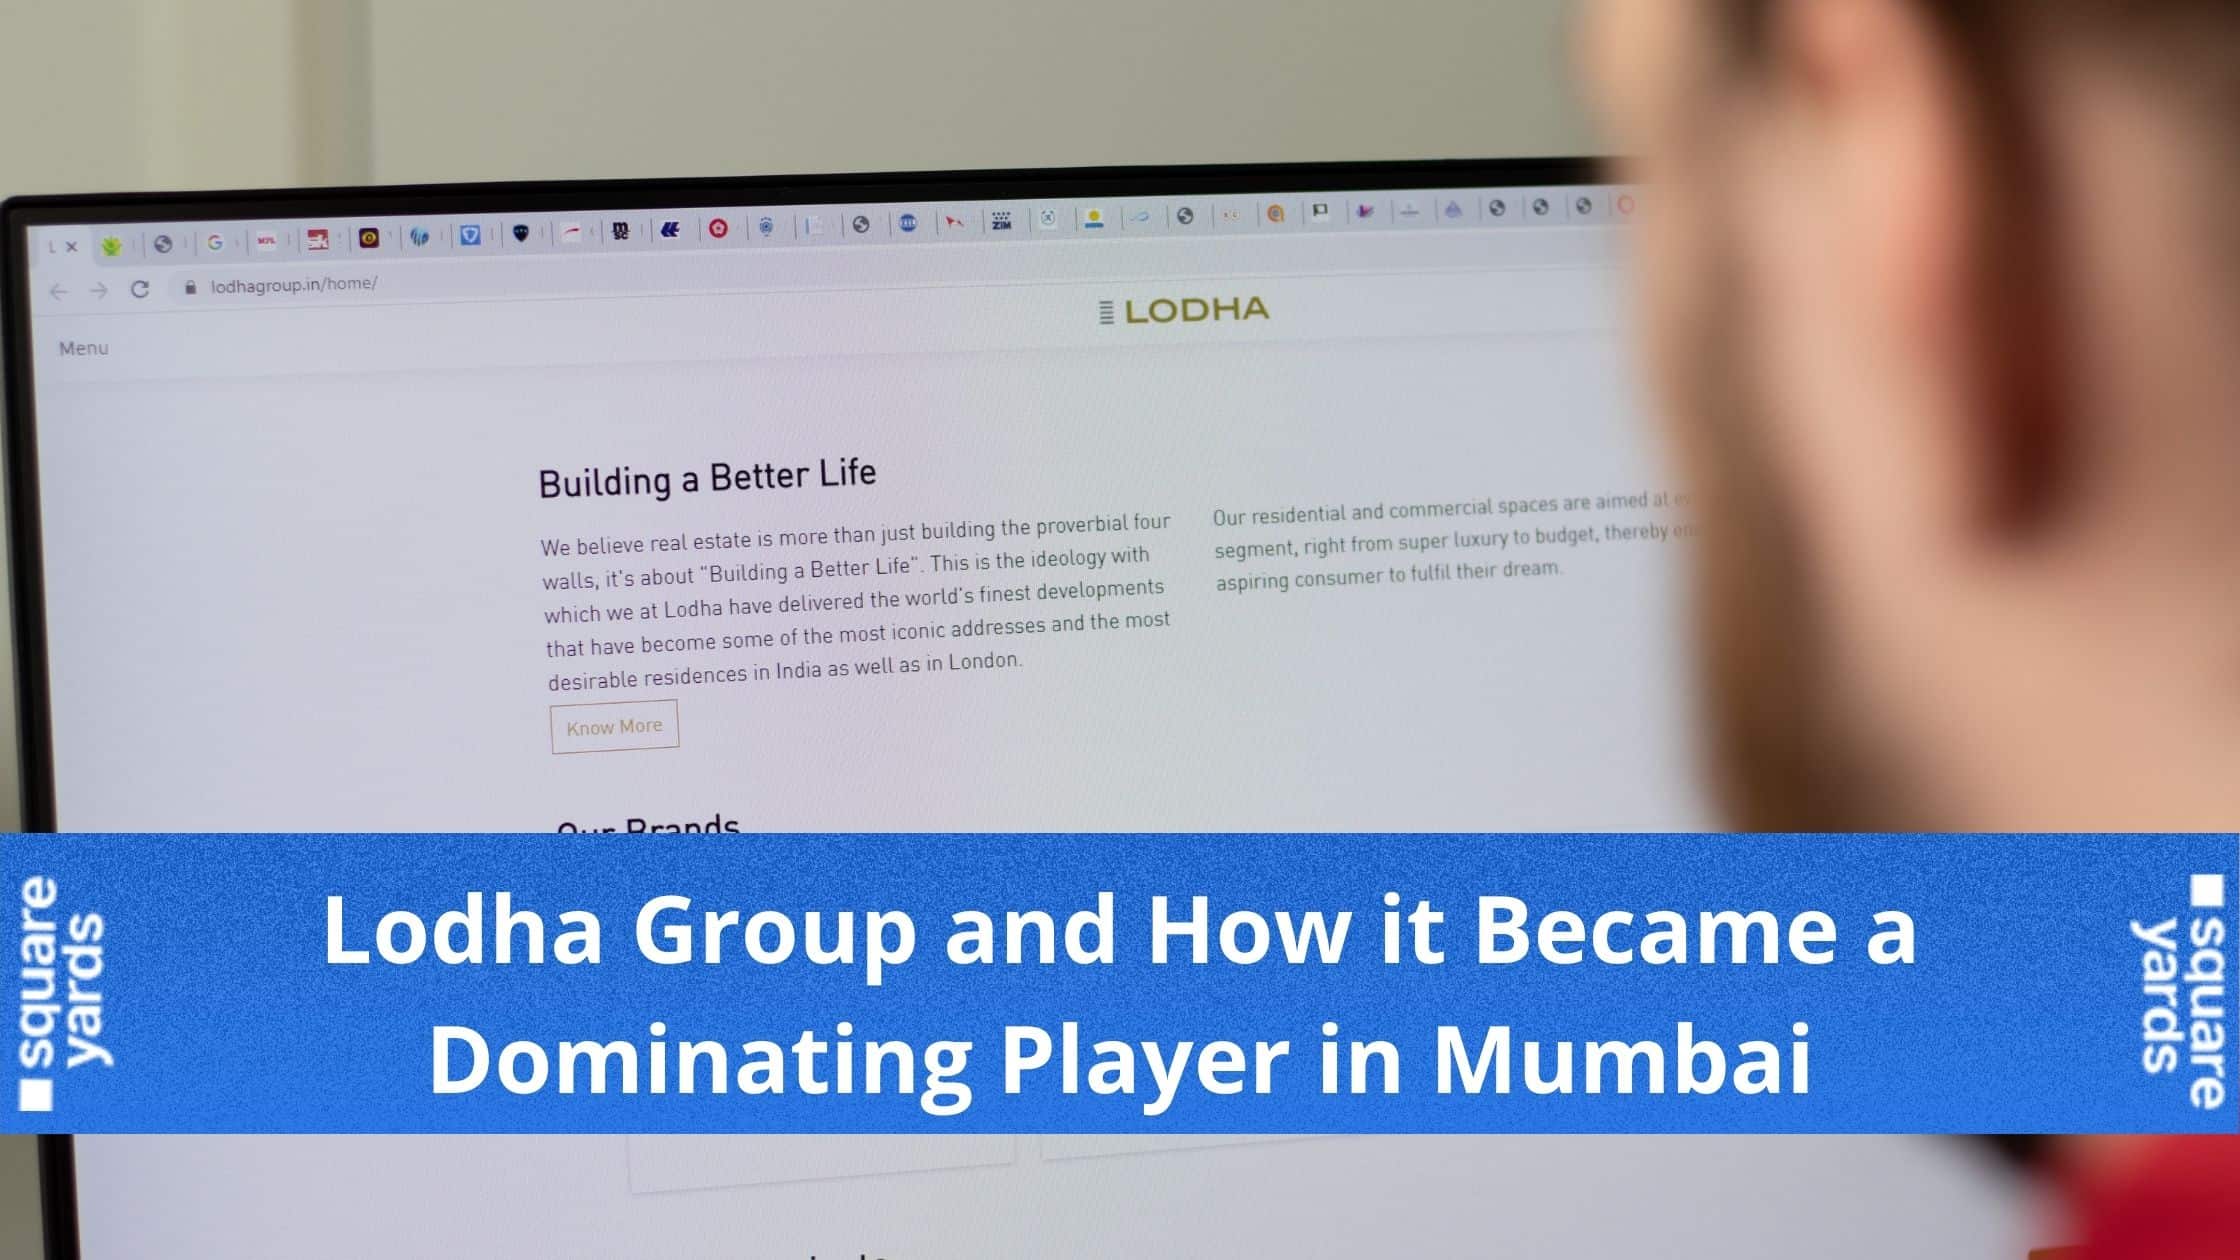 lodha-group-and-how-it-became-a-dominating-player-in-mumbai